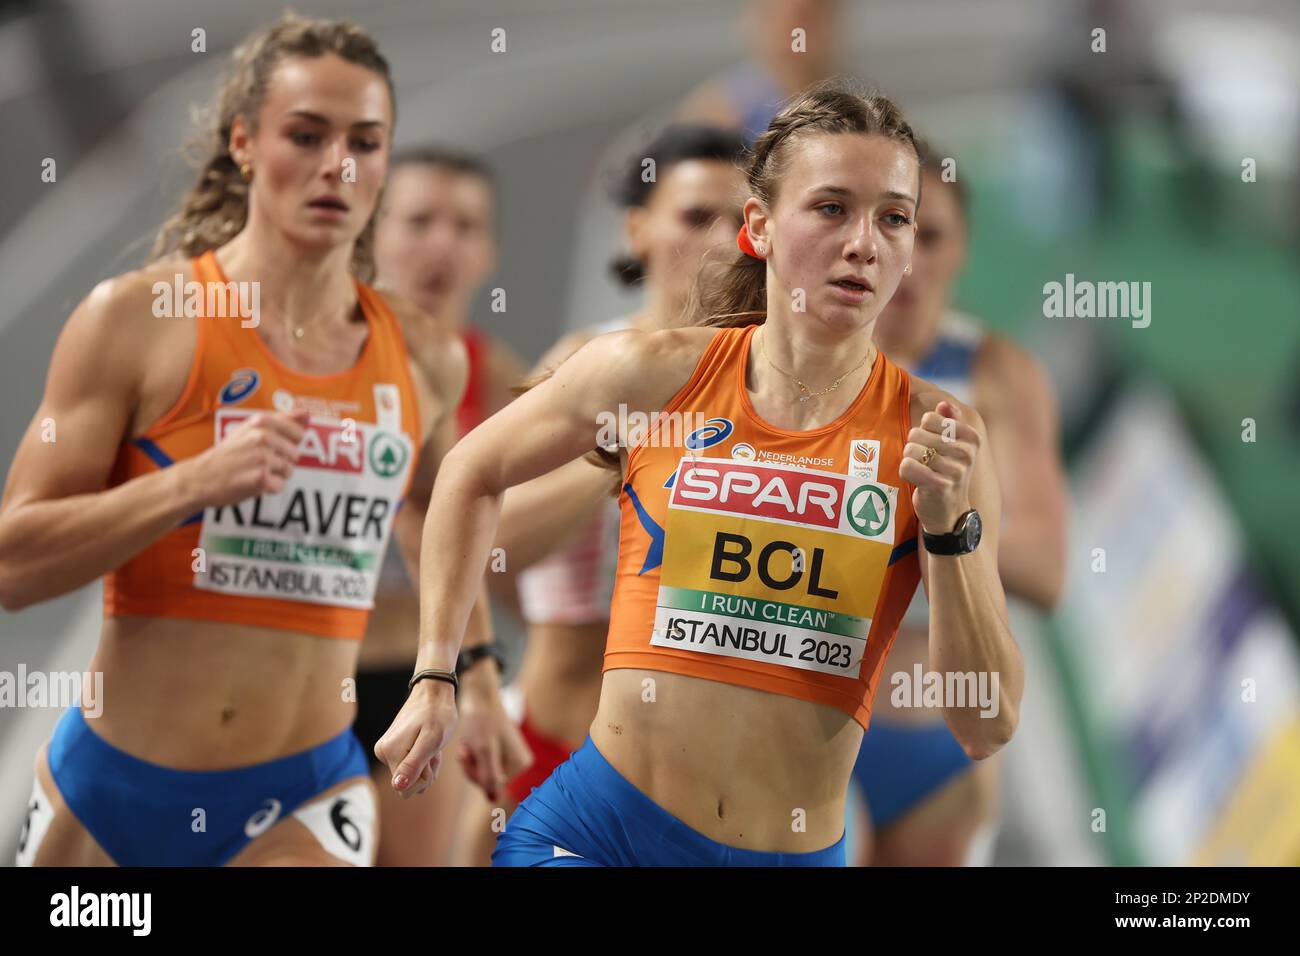 Femke Bol, of the Netherlands, and Lieke Klaver, left, also of the Netherlands, run in the Women 400 meters final at the European Athletics Indoor Championships at Atakoy Arena in Istanbul, Turkey,